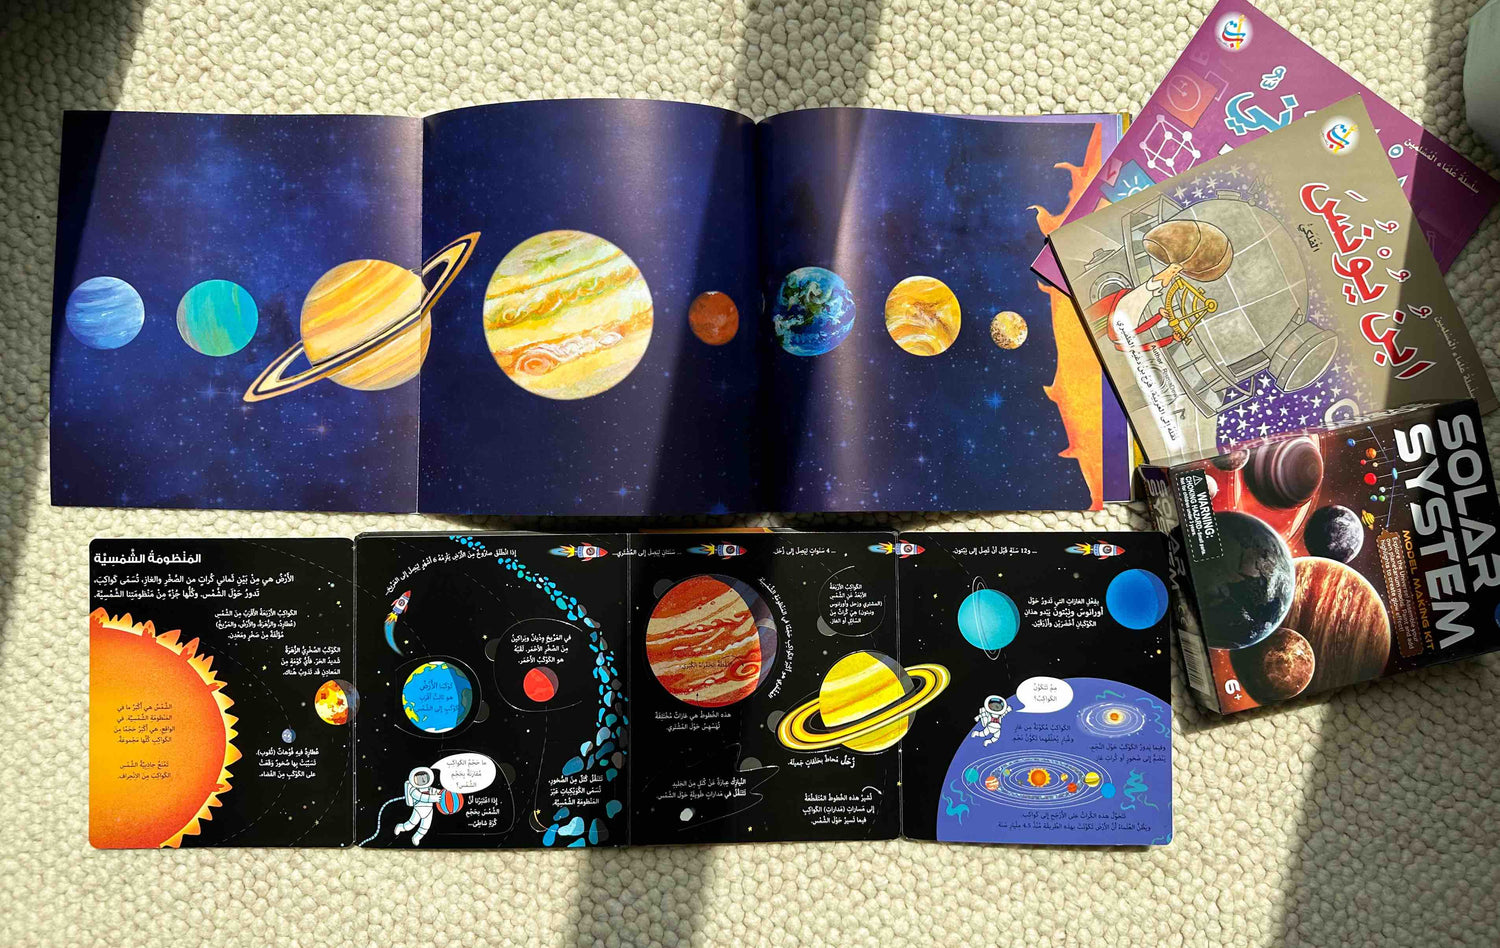 Arabic books about Space for kids